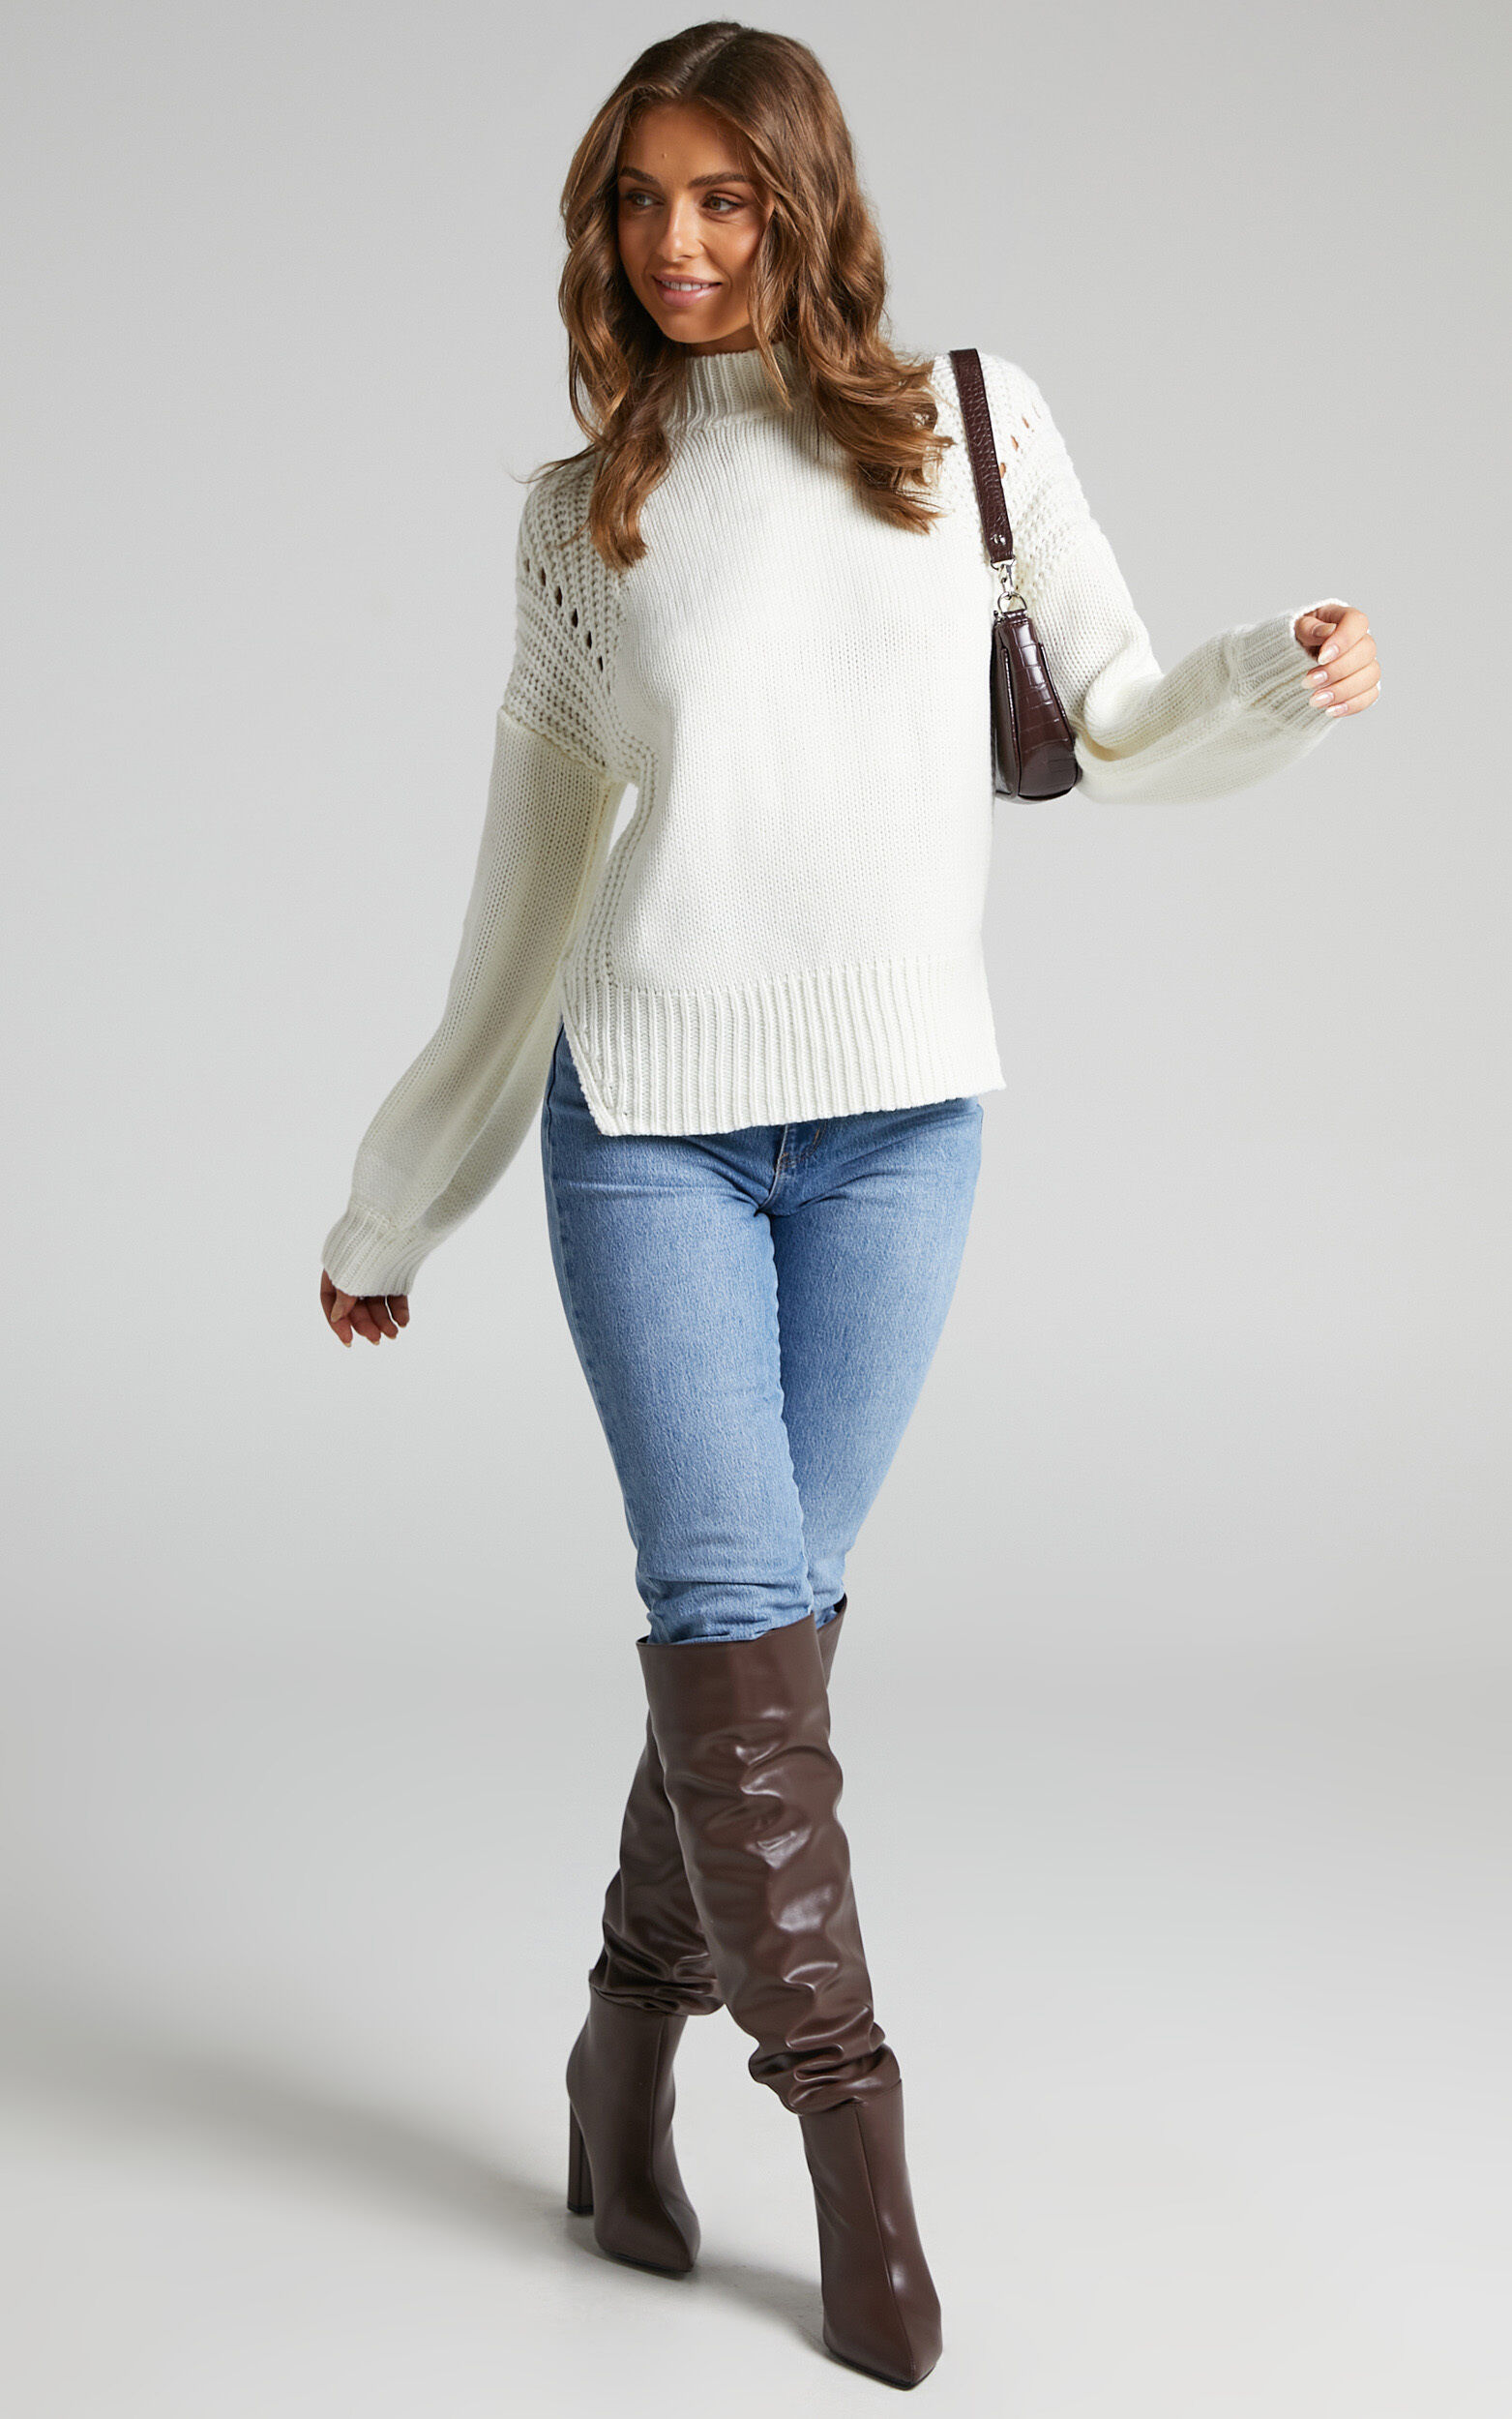 Trizia Long Sleeve High Neck Pointelle Knit Jumper in Cream - 06, CRE1, super-hi-res image number null